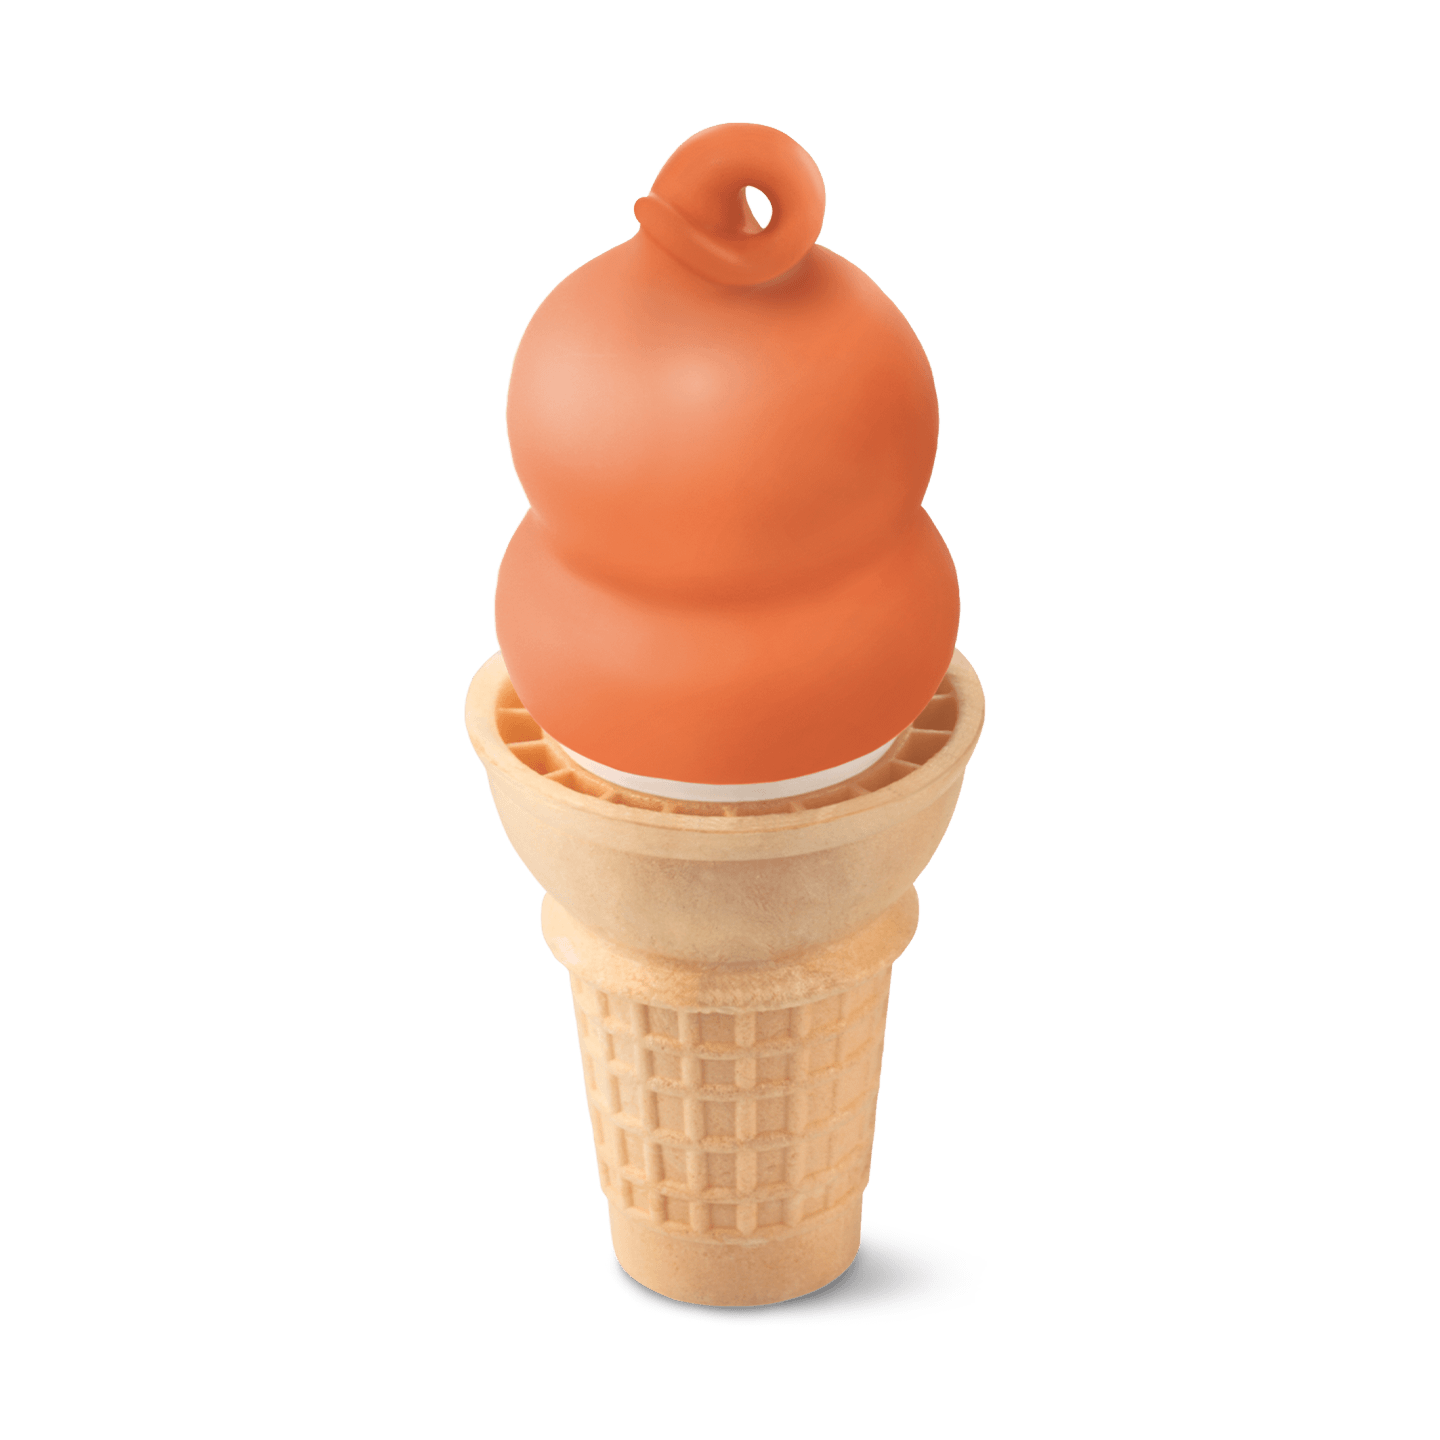 Dairy Queen Dreamsicle Dipped Ice Cream Cone Nutrition Facts